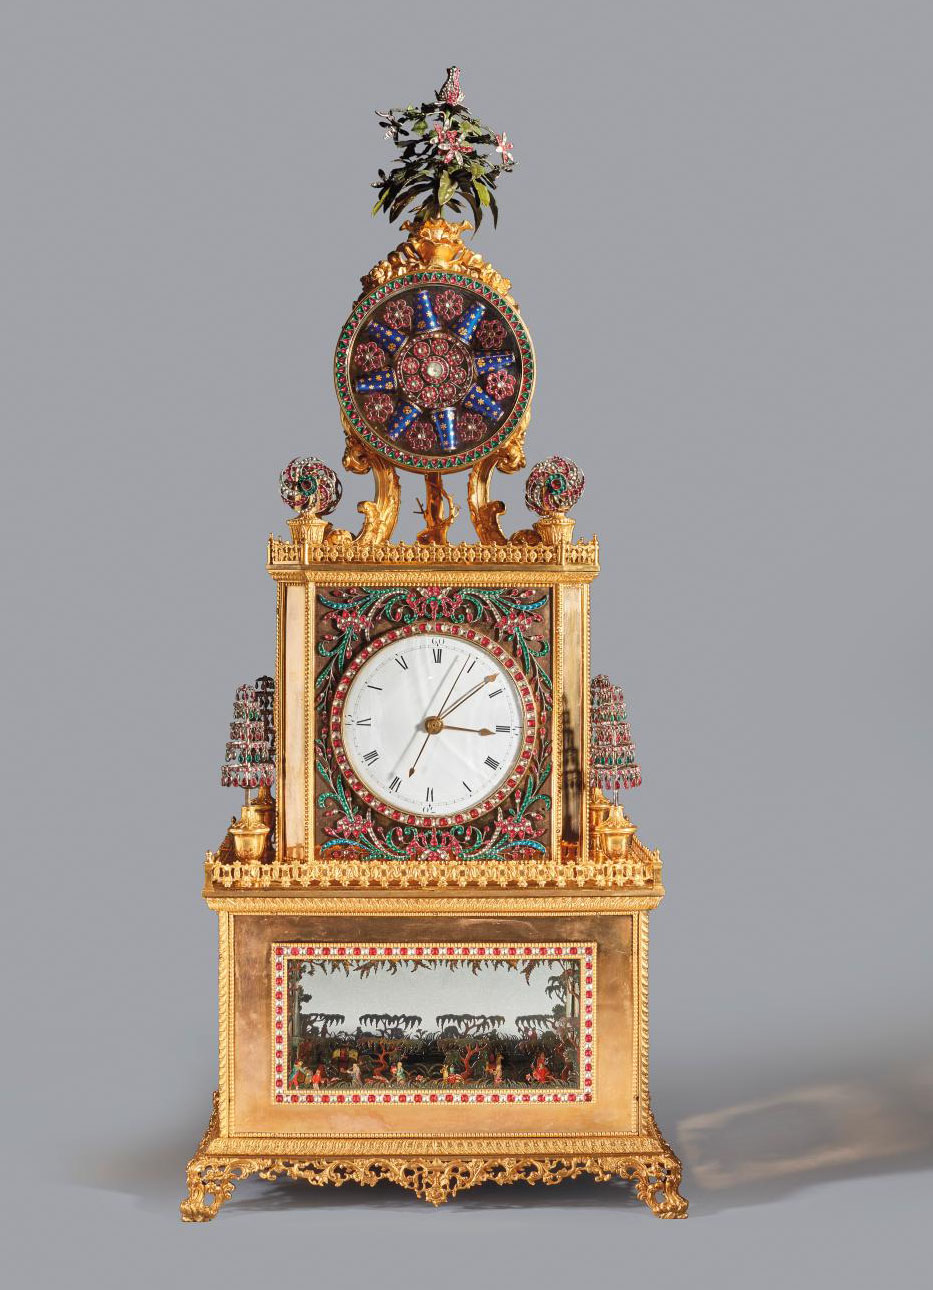 China, Qianlong era (1736-1795). Imperial automaton clock decorated with tribute bearers, gilded bronze, colored stone inlays, reverse glass painting, mirror, enamel and silk, three-melody bell mechanism, 85 x 24 x 23 cm/33.4 x 9.4 x 9 in. Estimate: €800,000/1.2 M